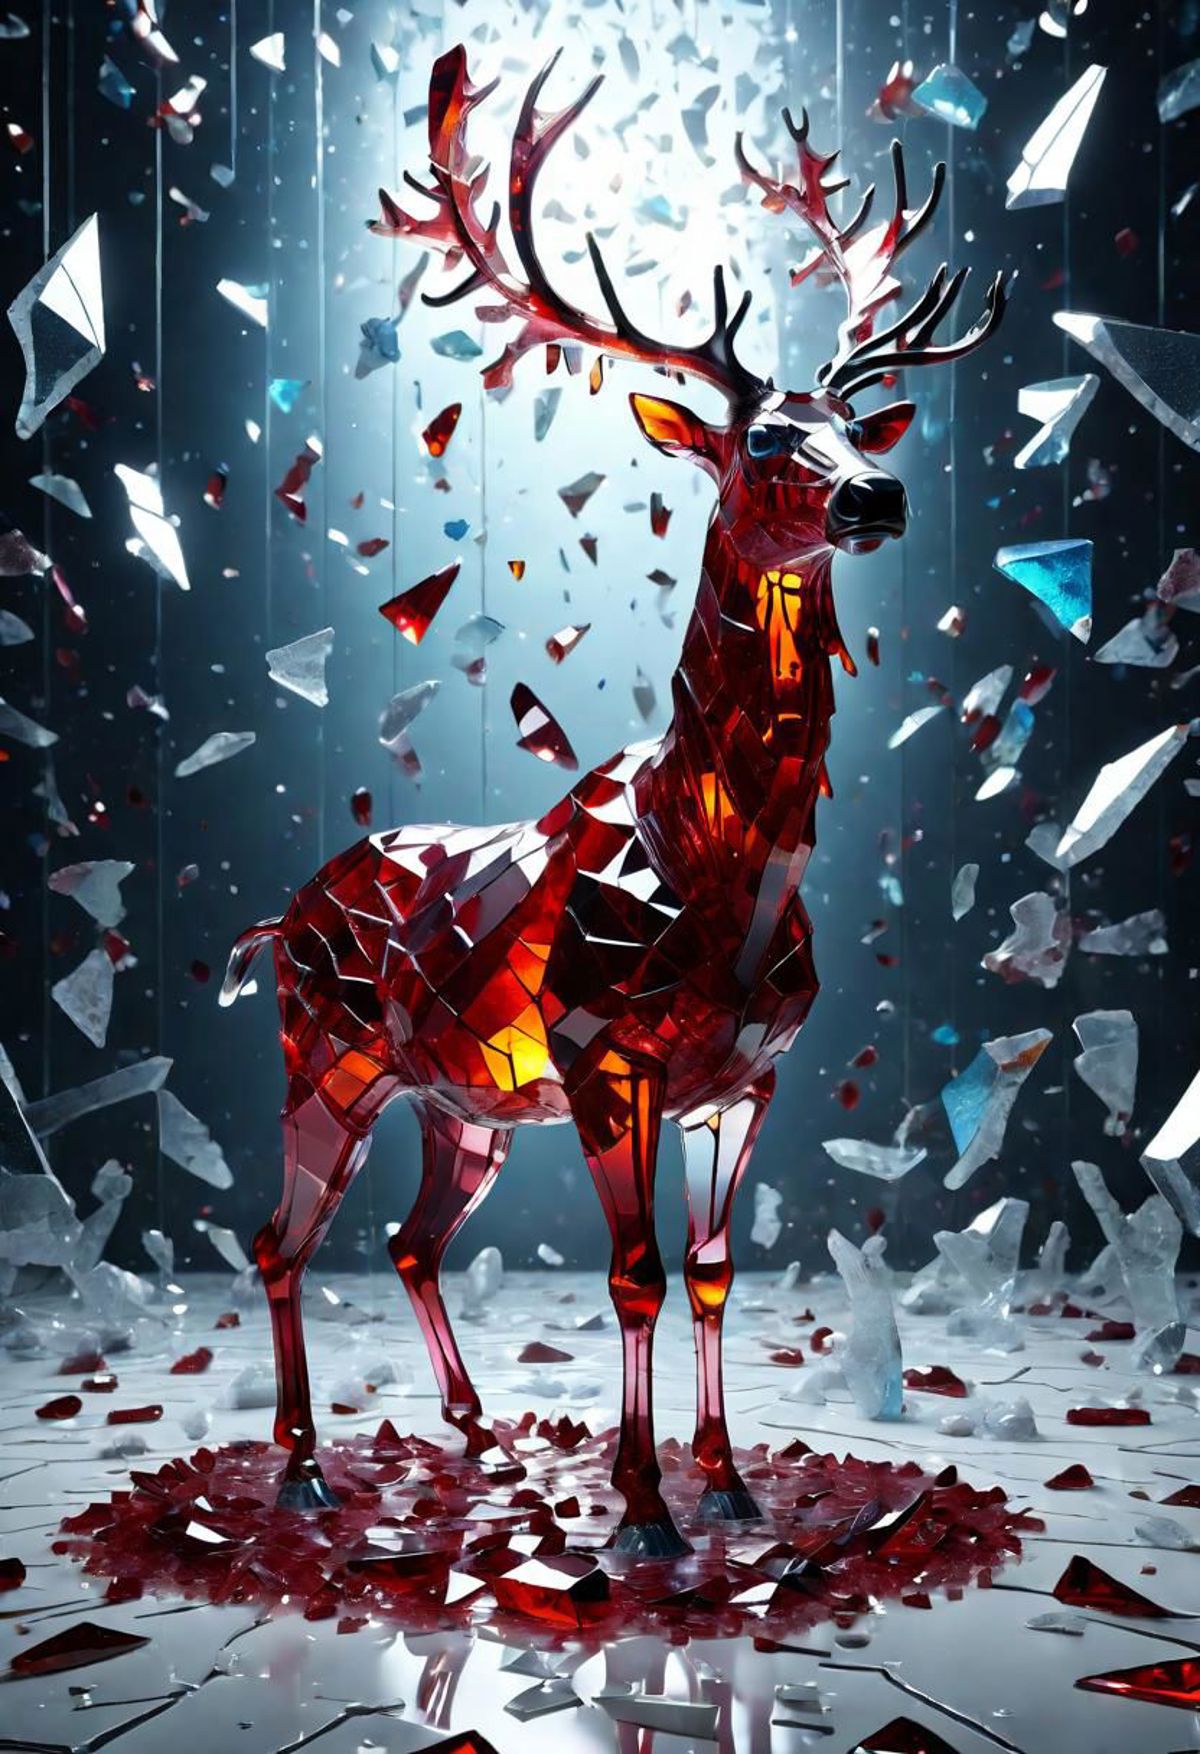 A Red Deer with Antlers Standing in a Glass Shards Environment